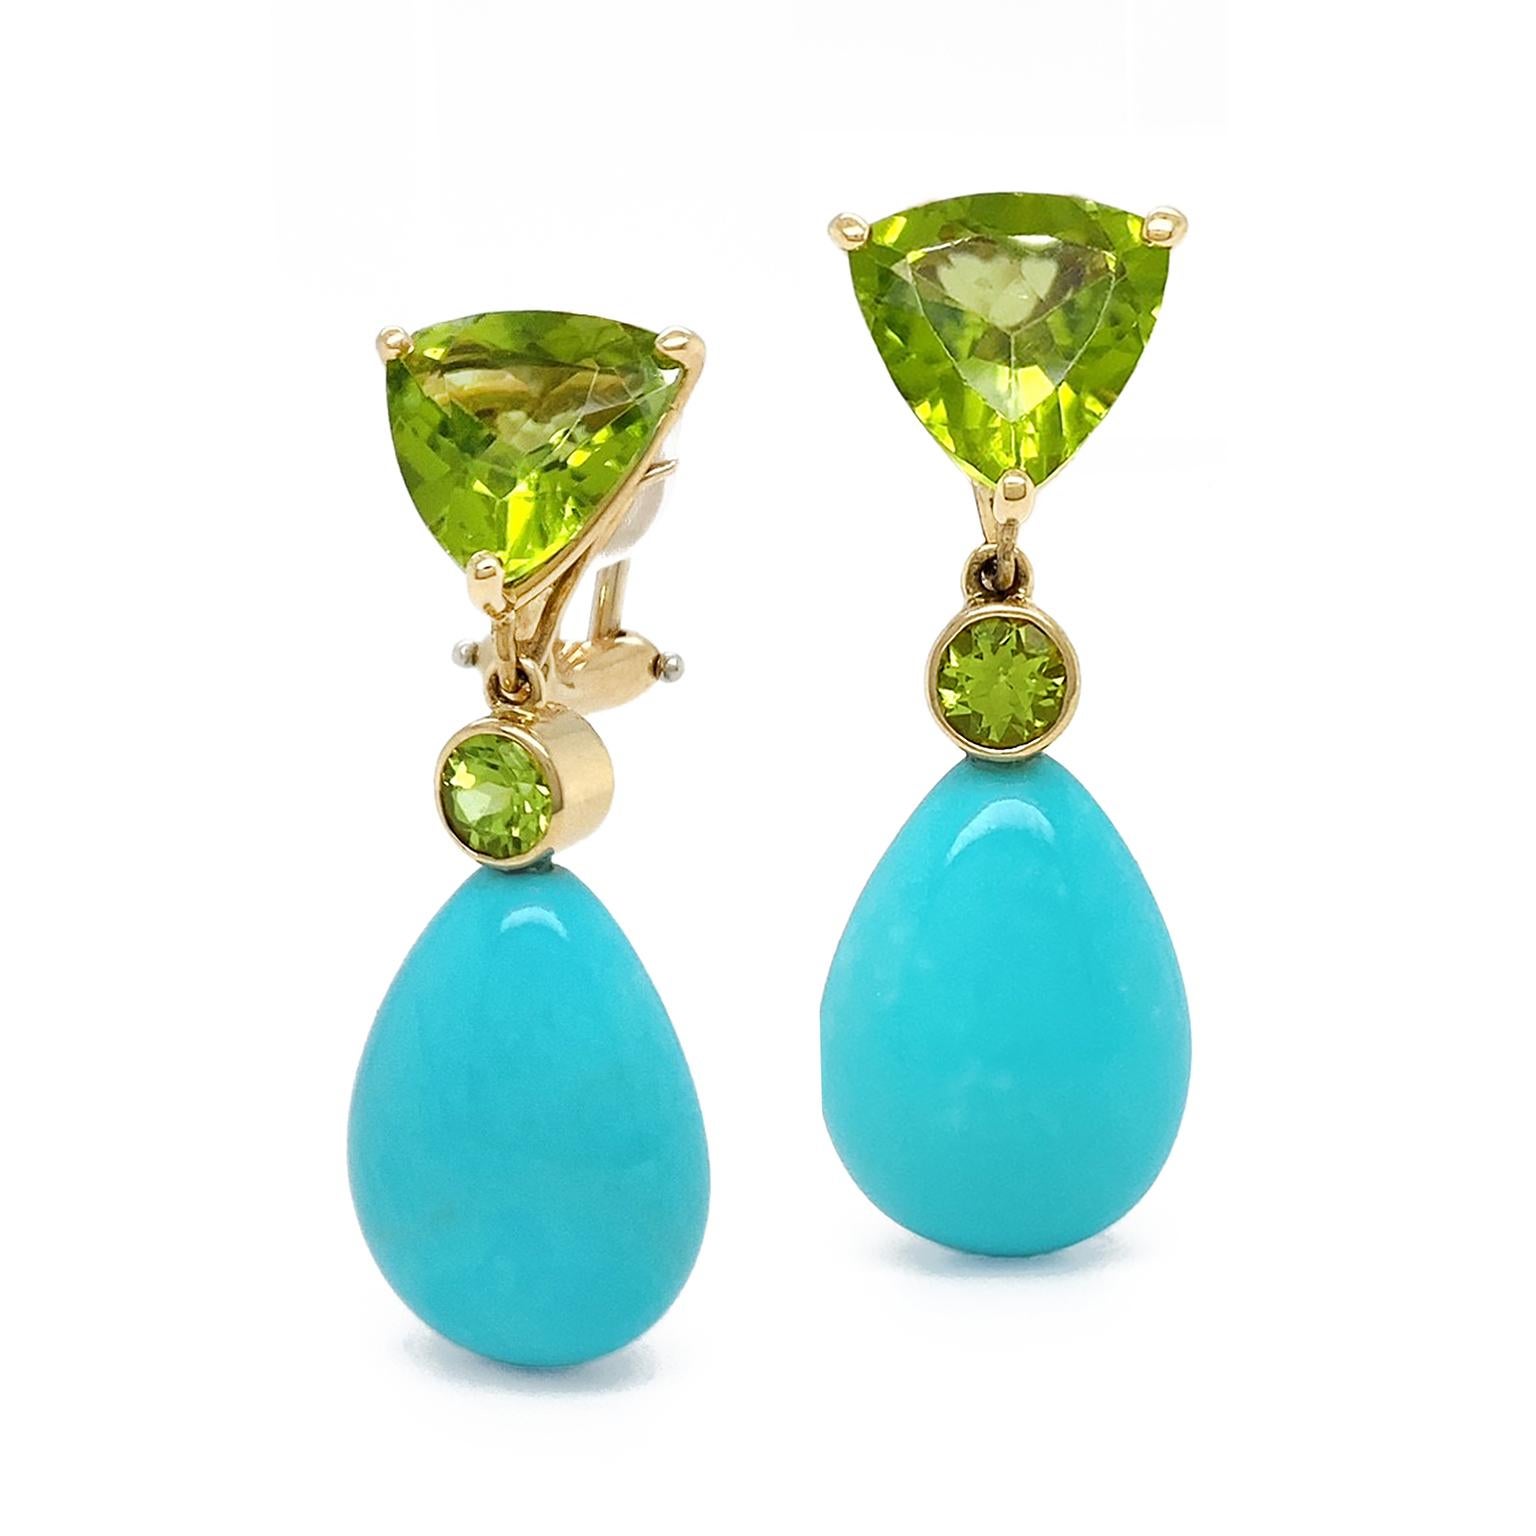 The cool hue of turquoise complements lucid shades of green in peridot for these drop earrings. A flickering glow from a trilliant cut peridot begins the design, followed by a round cut bezel set beneath. Each cut features the striking green